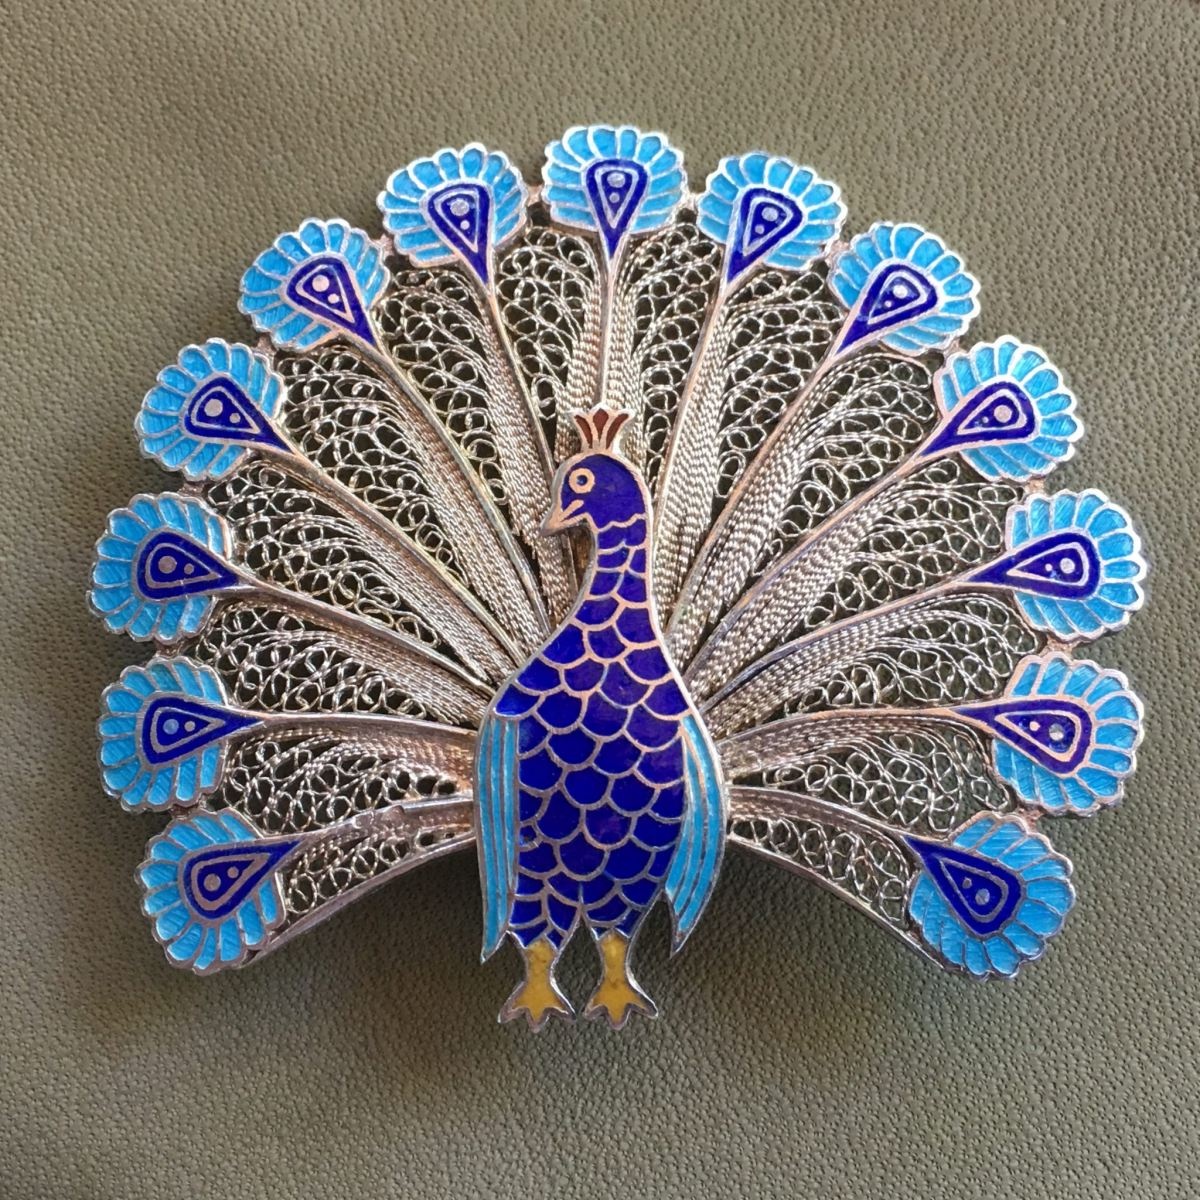 Enamel Peacock with Fine Filigree Feathers